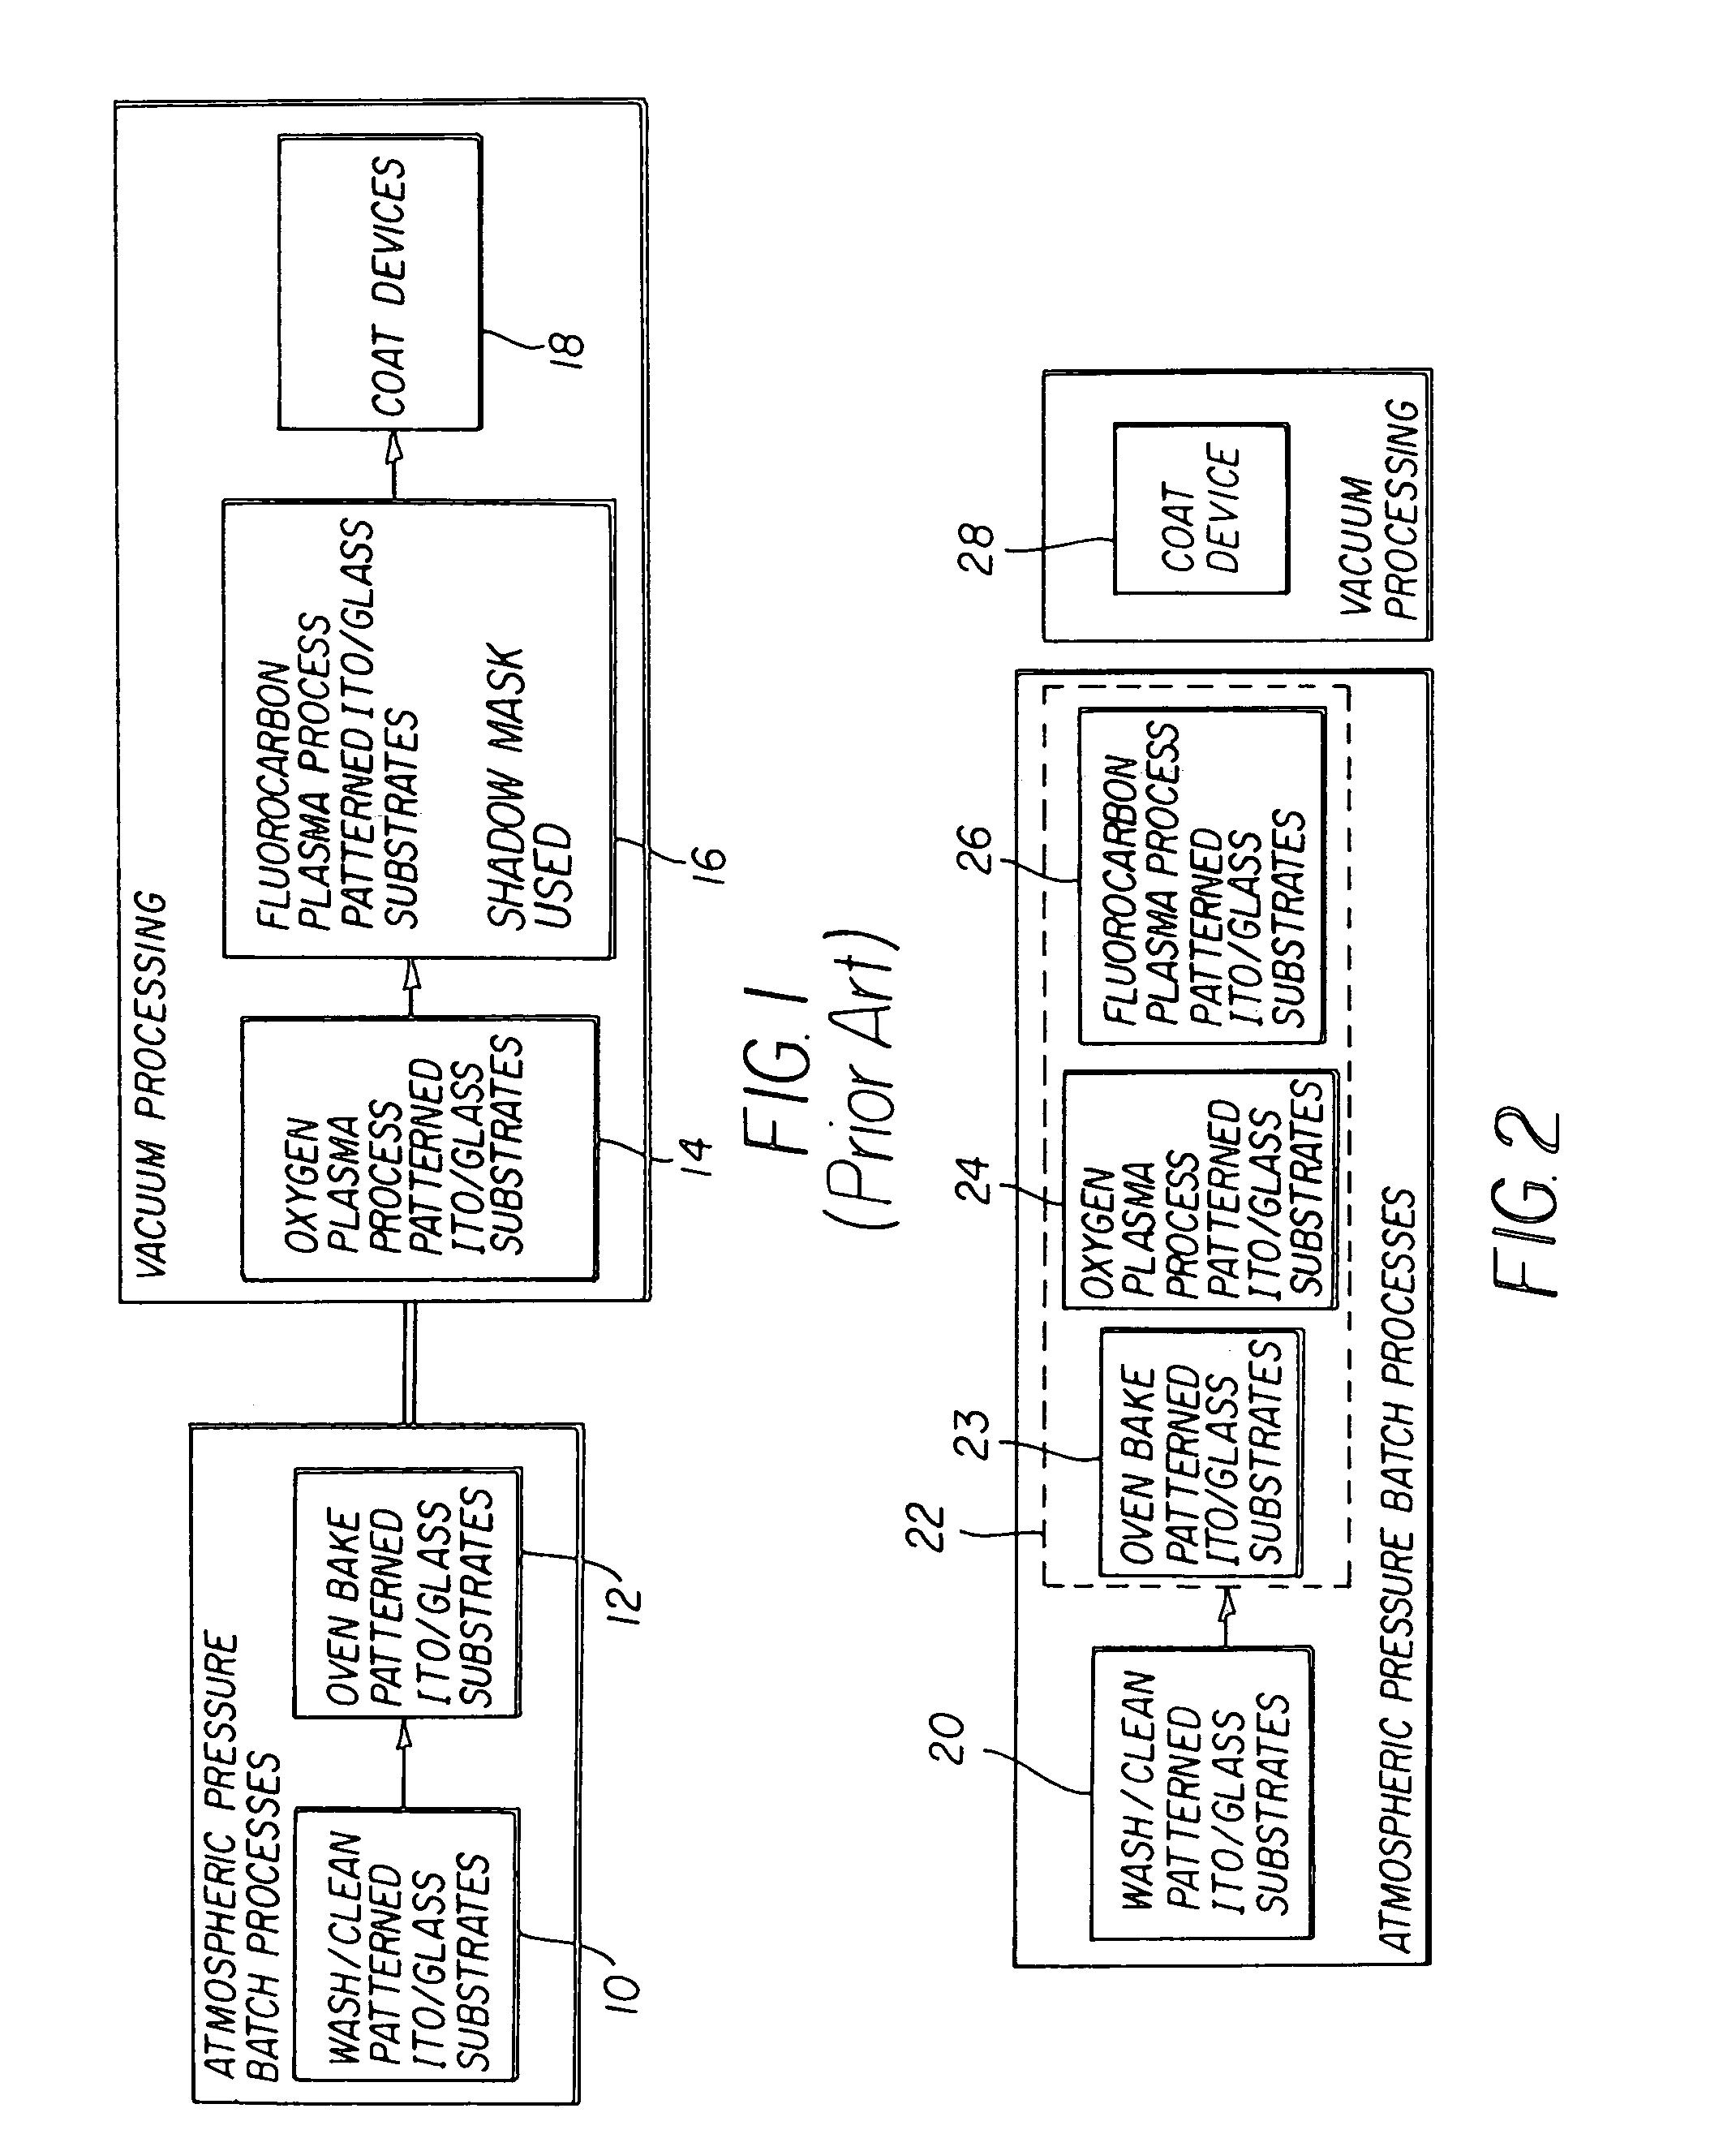 Providing fluorocarbon layers on conductive electrodes in making electronic devices such as OLED devices